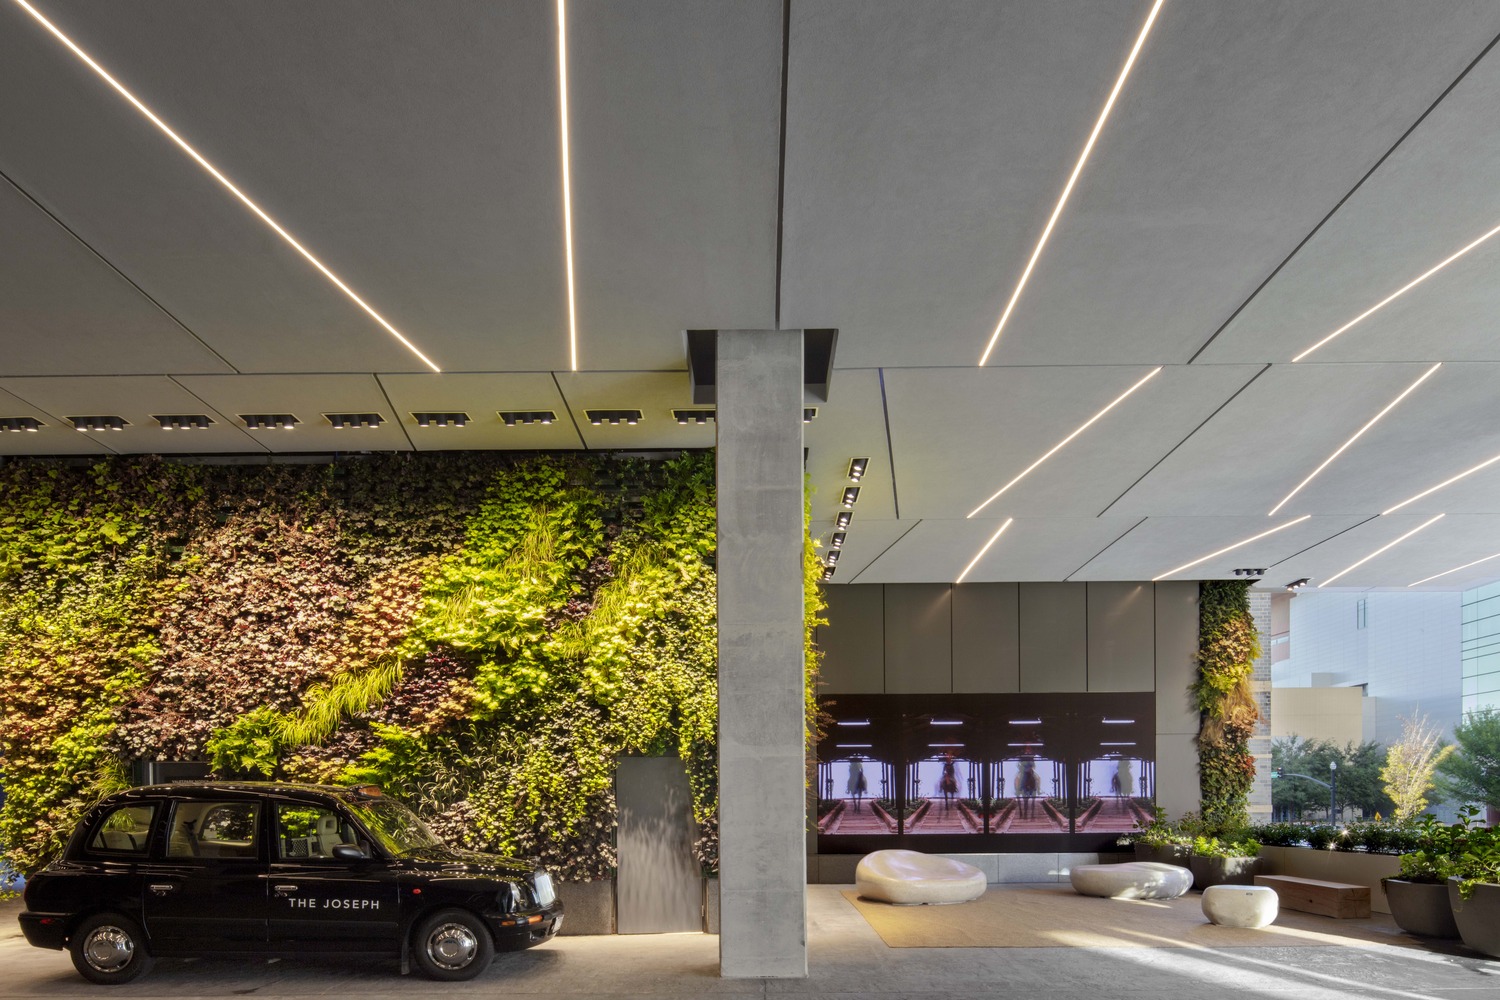 When sharing externally, all image credits should go to Eric Laignel.

green / living wall